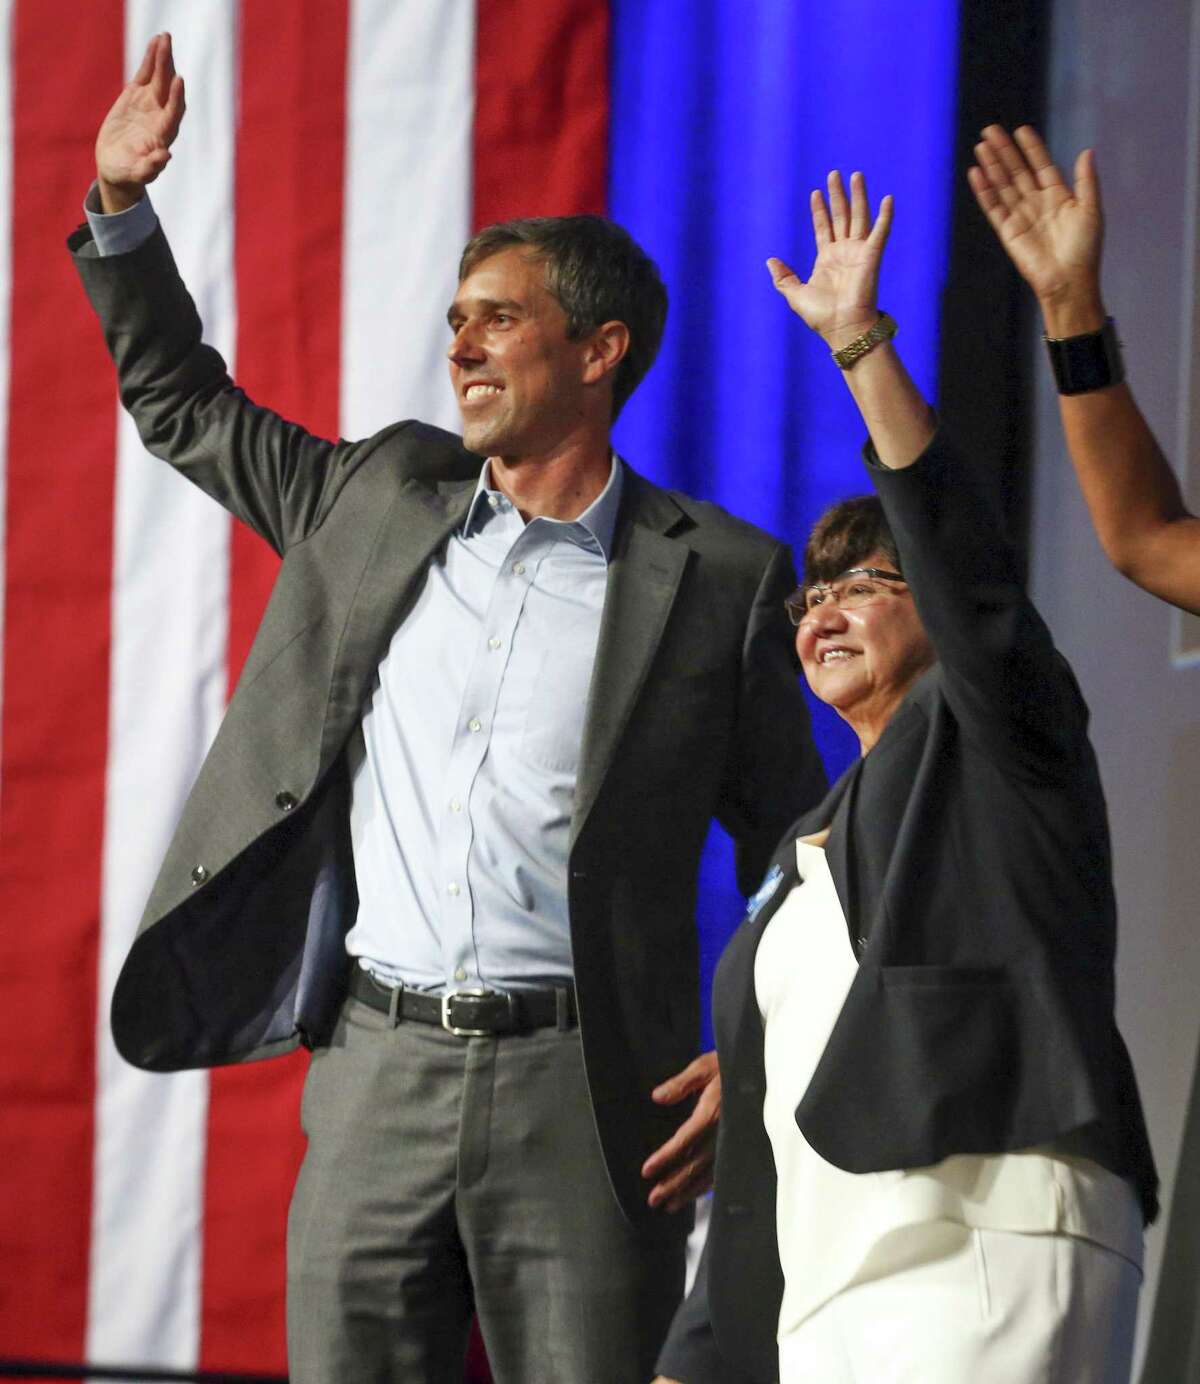 Beto O'Rourke and Lupe Valdez wave to the crowd at the end of the general session at the Texas Democratic Convention Friday, June 22, 2018, in Fort Worth, Texas. (AP Photo/Richard W. Rodriguez)